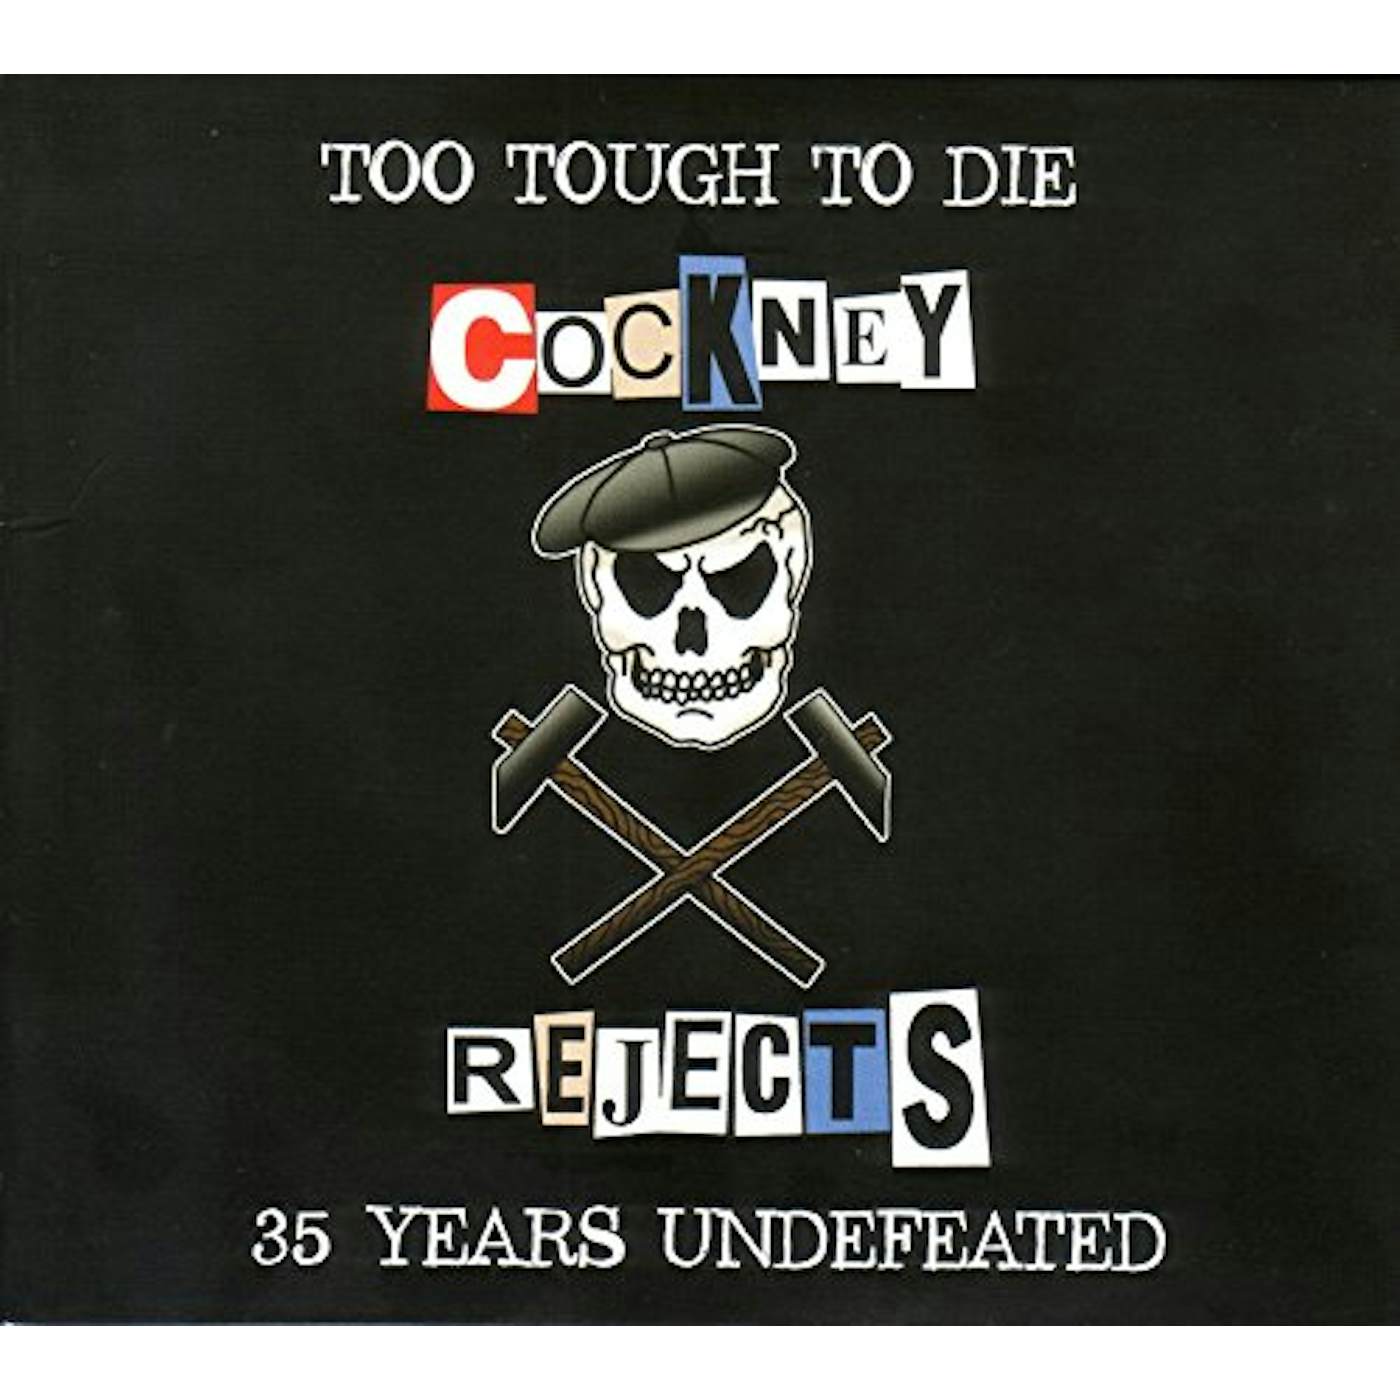 Cockney Rejects TOO TOUGH TO DIE - 35 YEARS UNDEFEATED CD